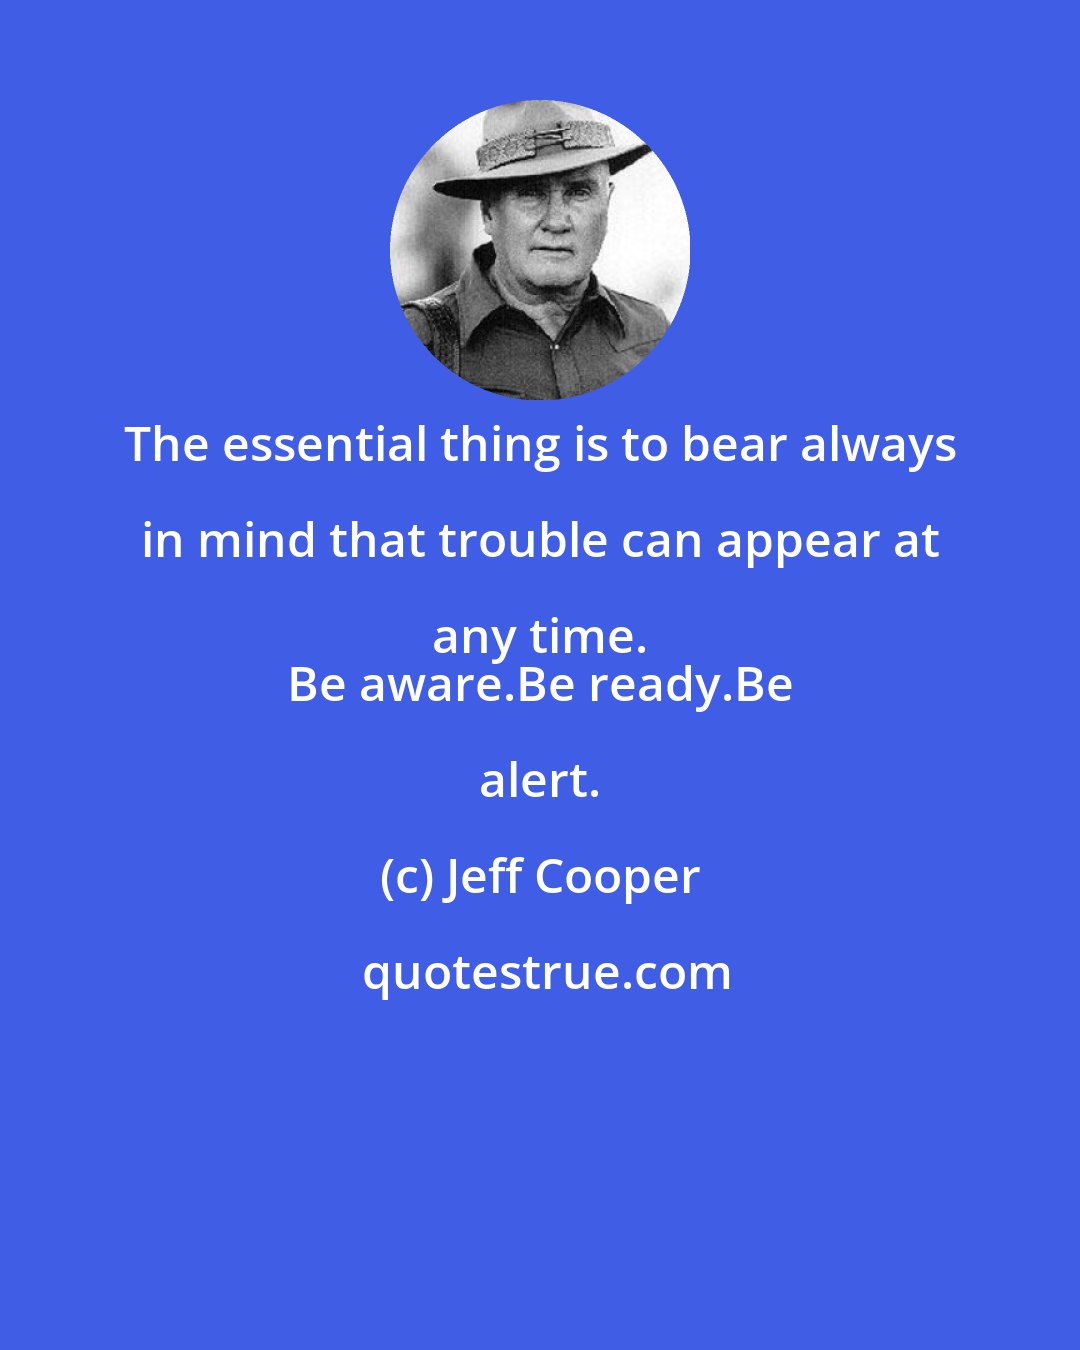 Jeff Cooper: The essential thing is to bear always in mind that trouble can appear at any time. 
 Be aware.Be ready.Be alert.